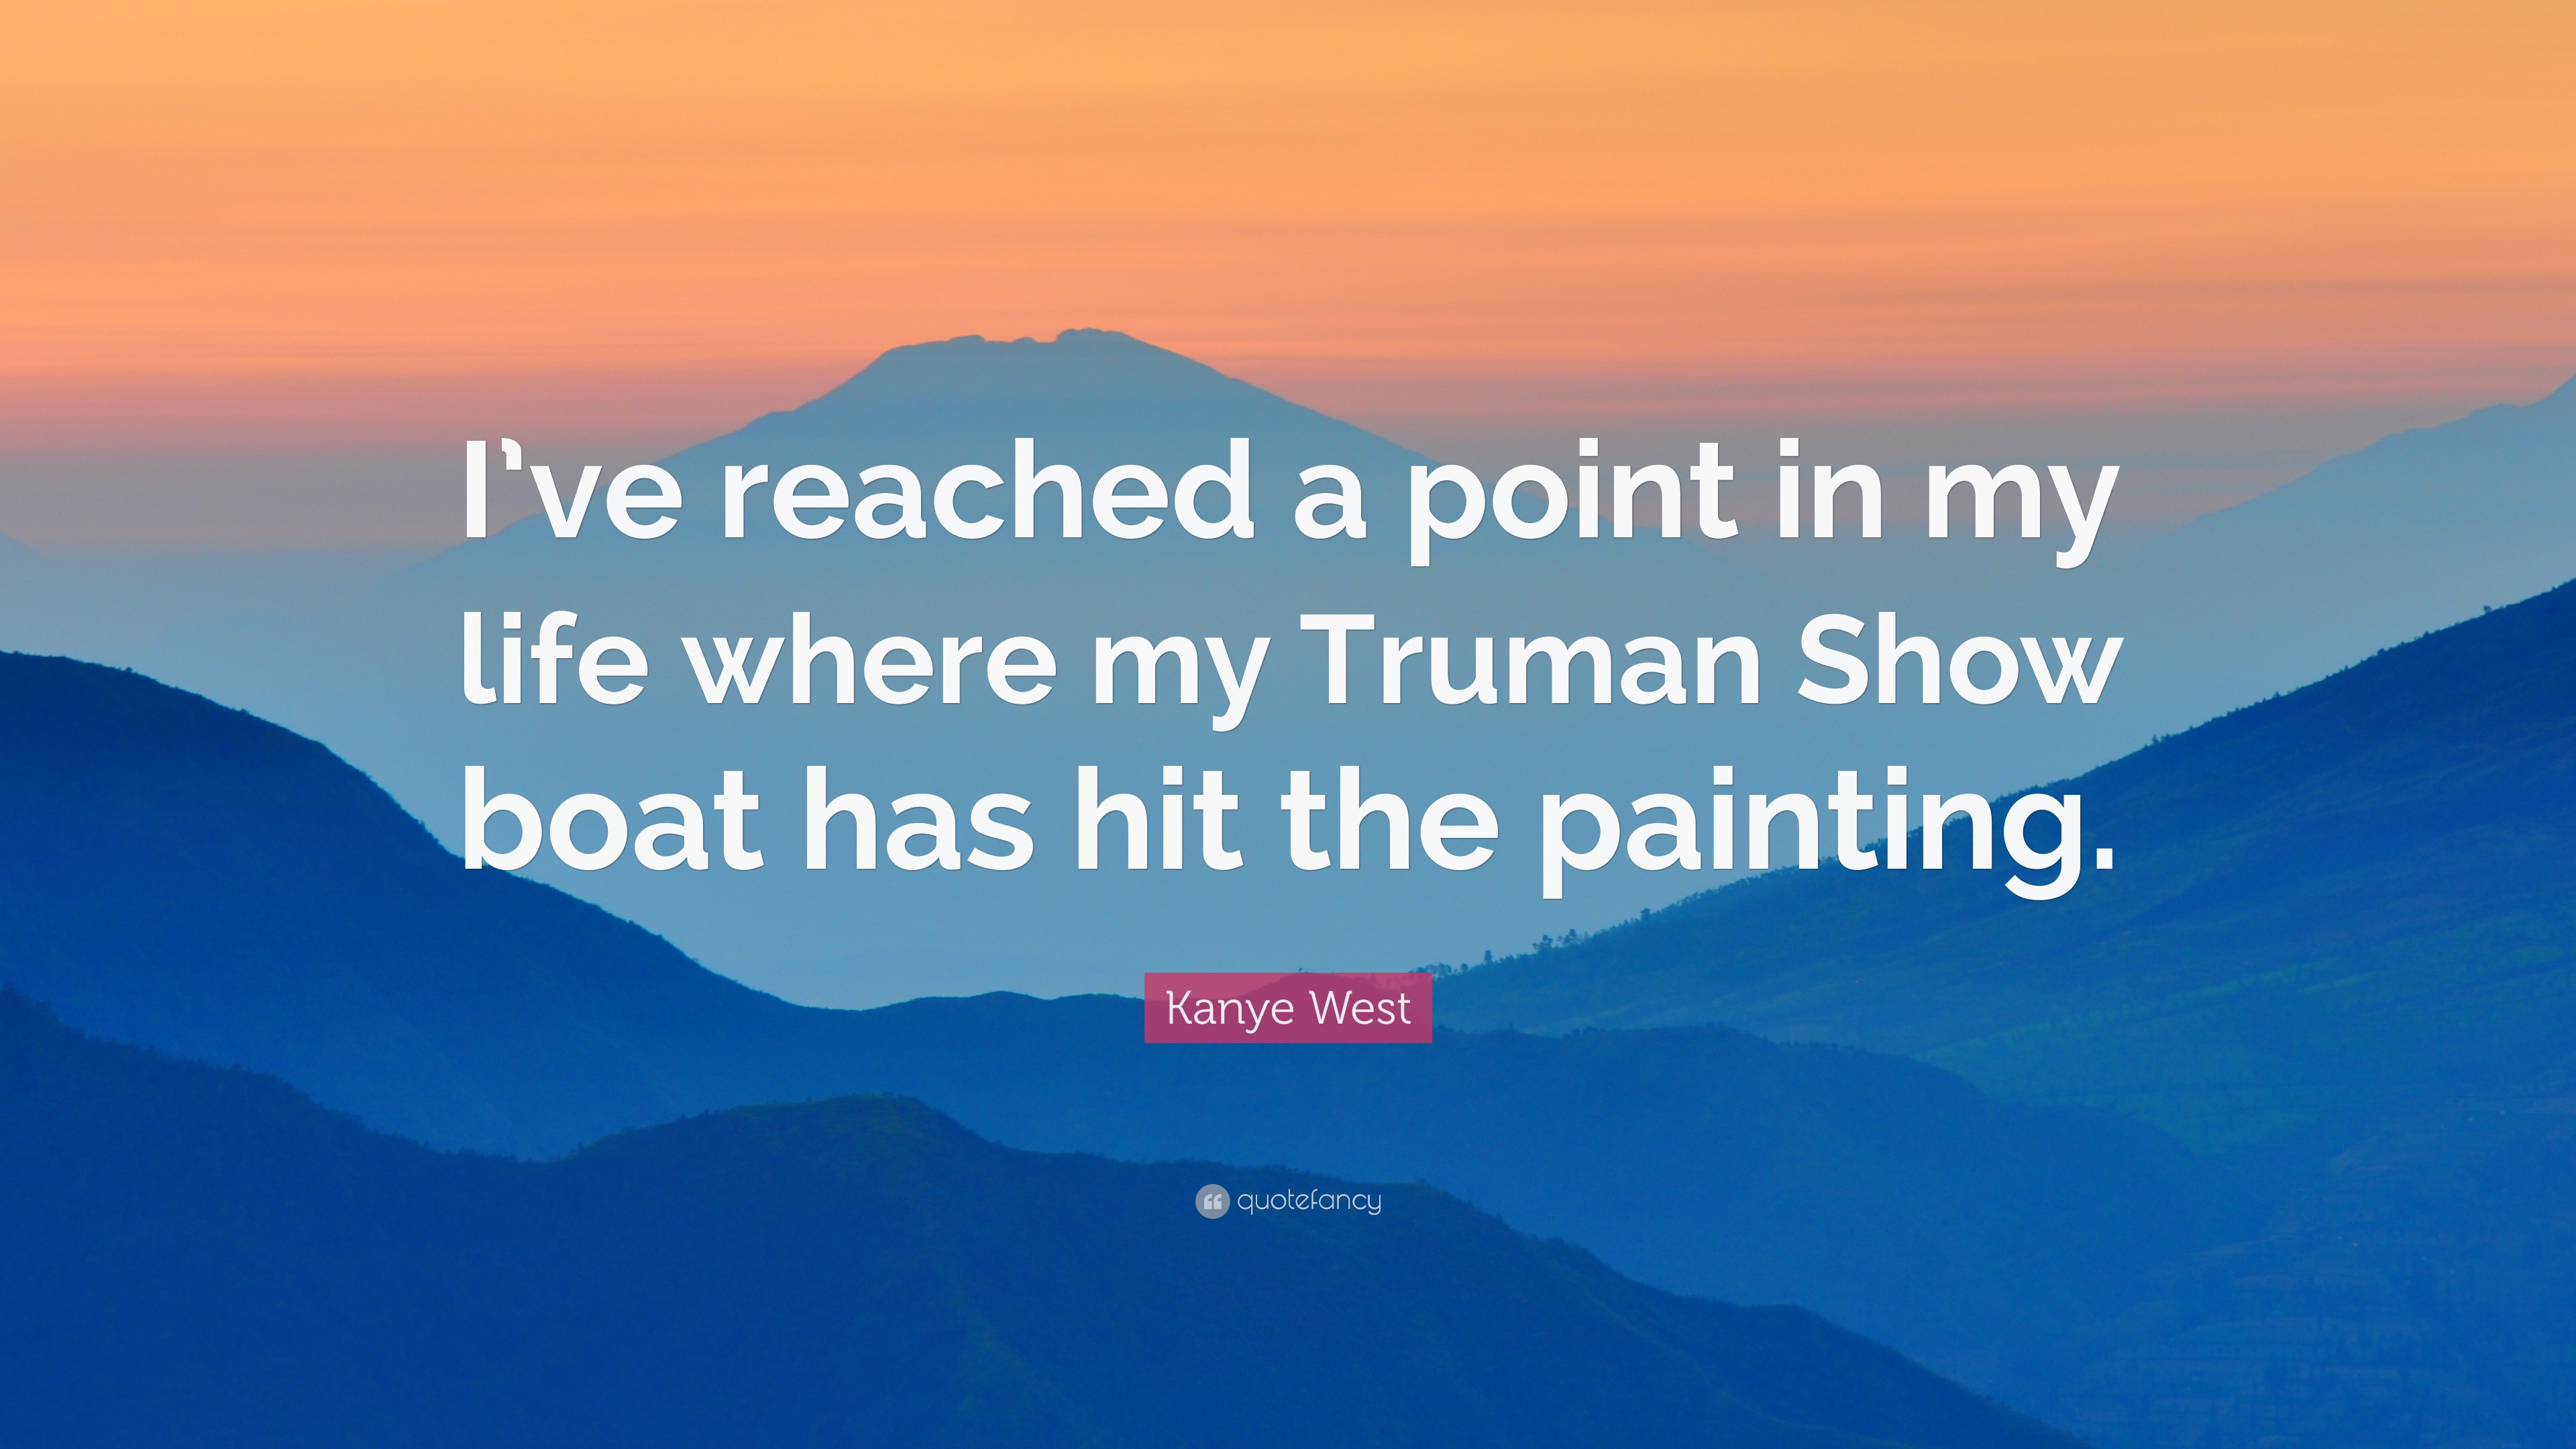 Kanye West Quote: “I've reached a point in my life where my Truman